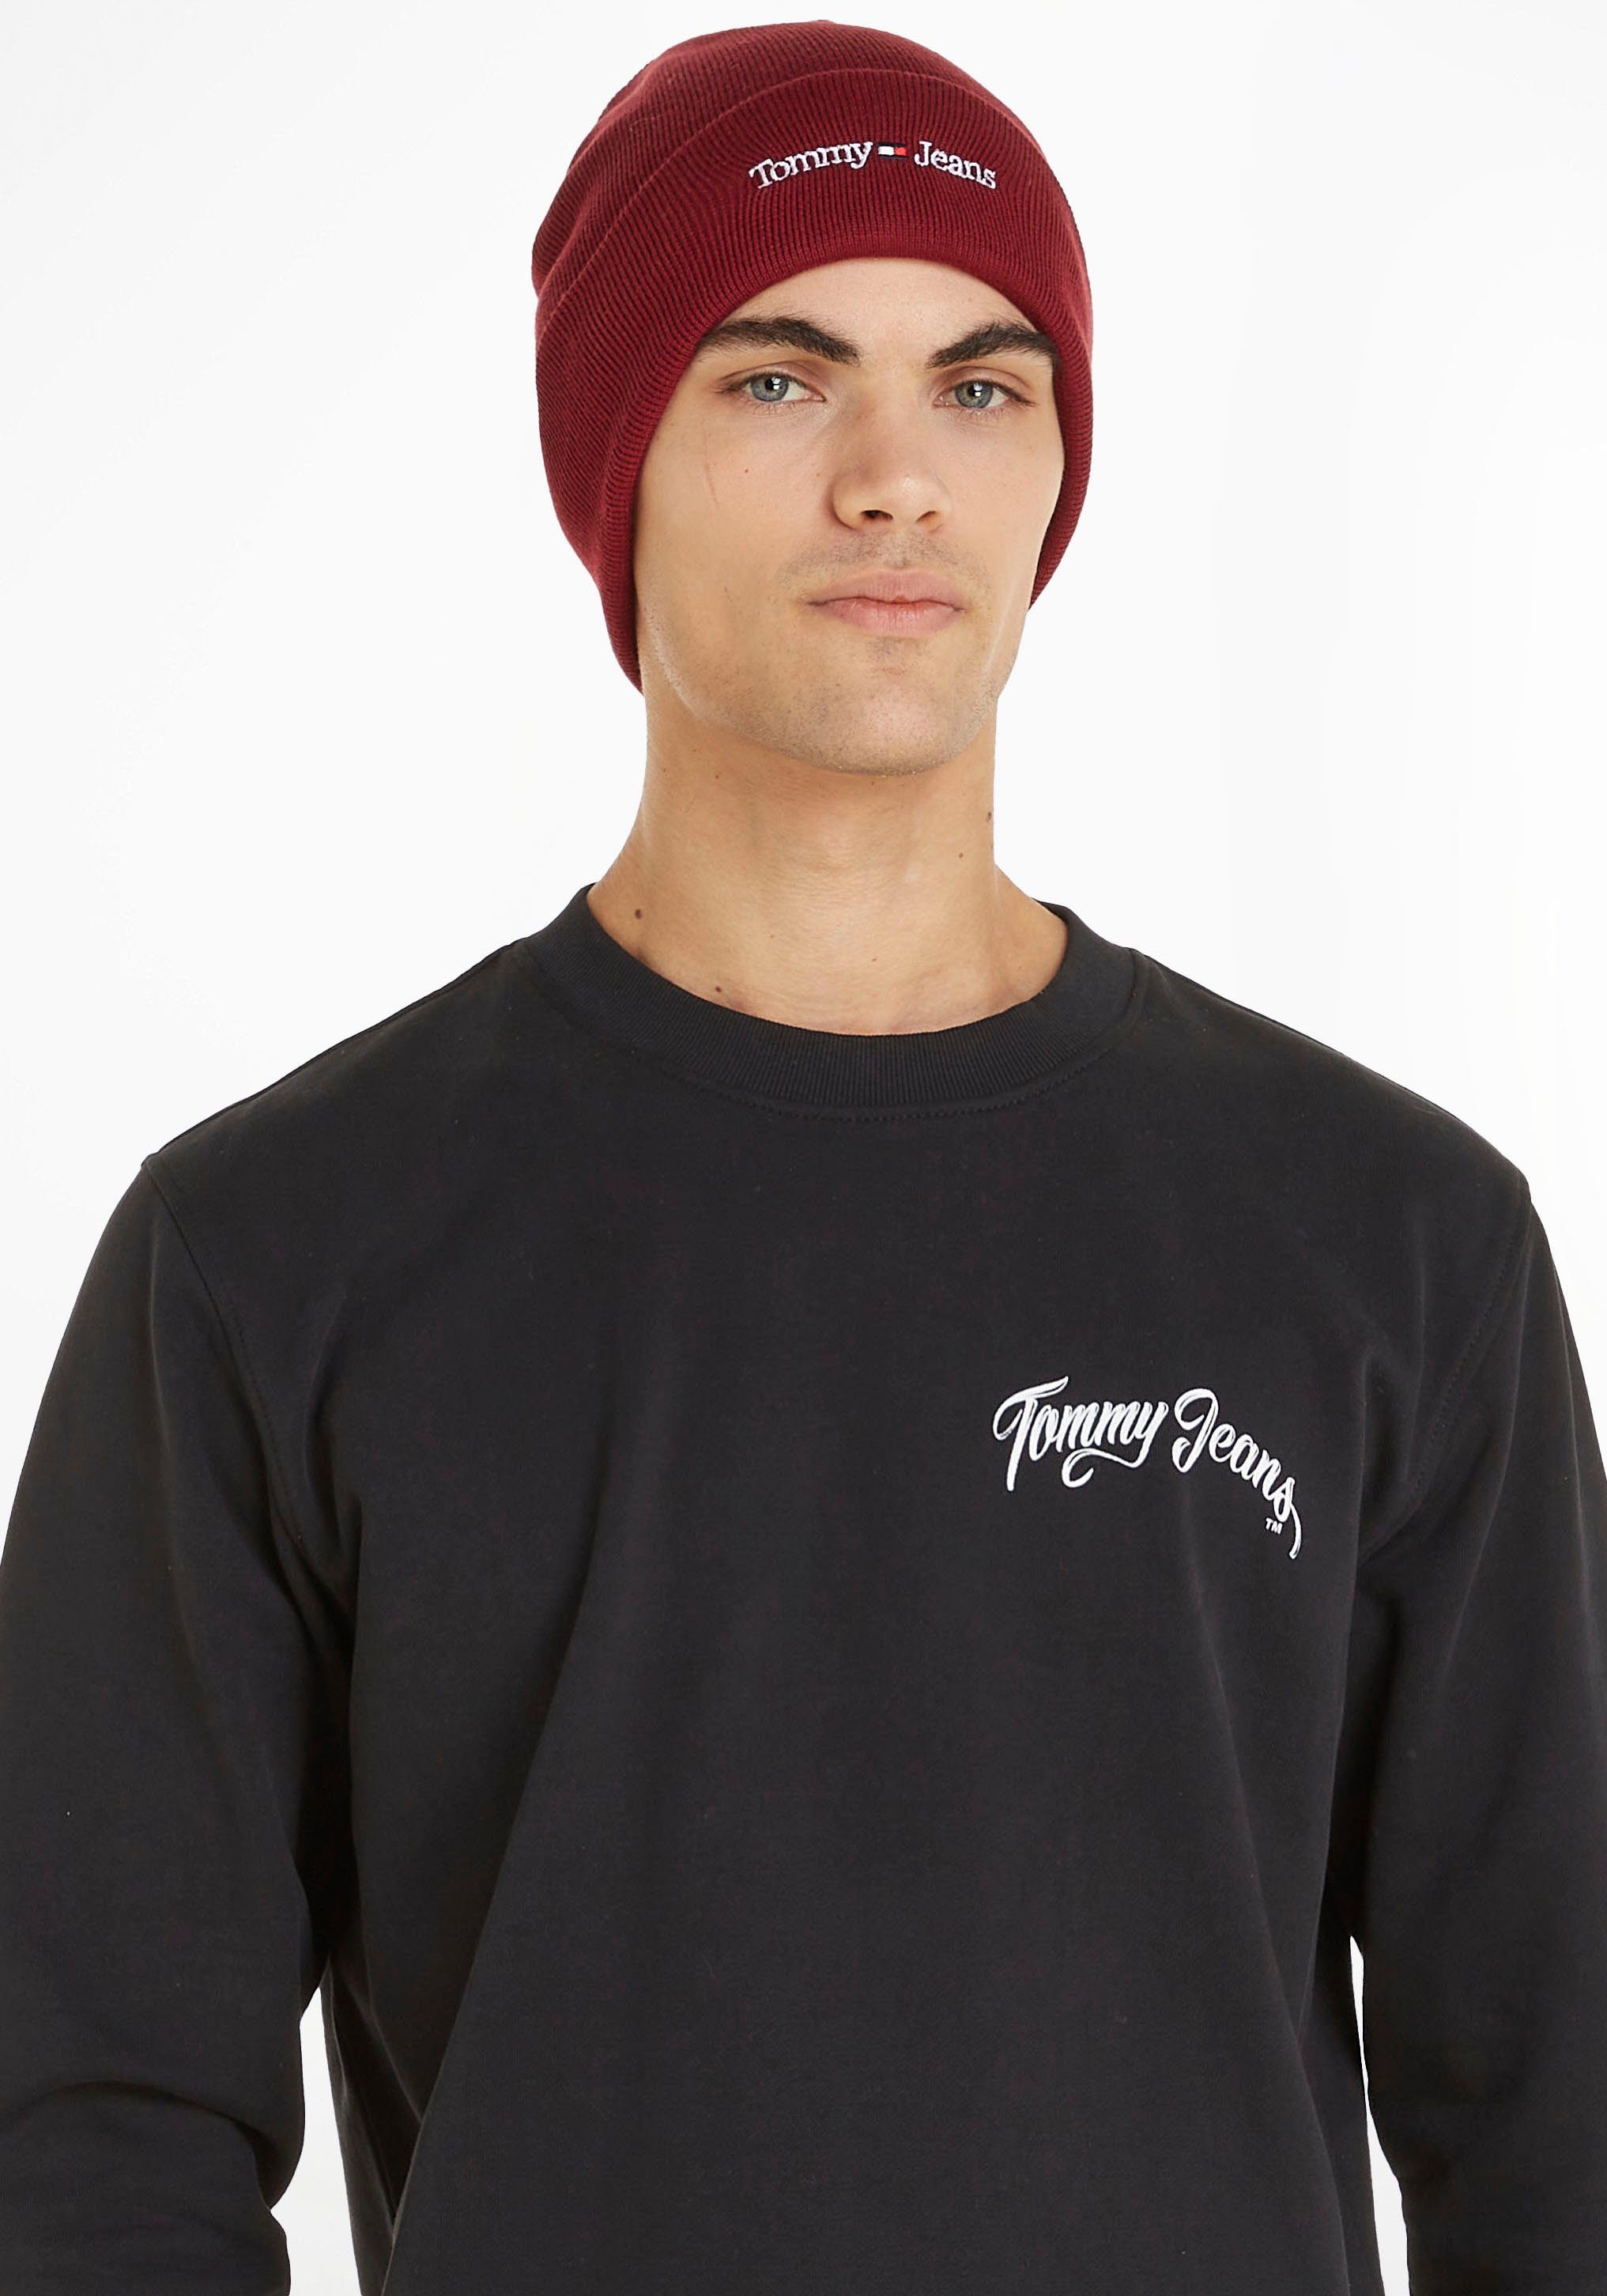 BEANIE SPORT TJM Rouge Jeans Tommy Beanie